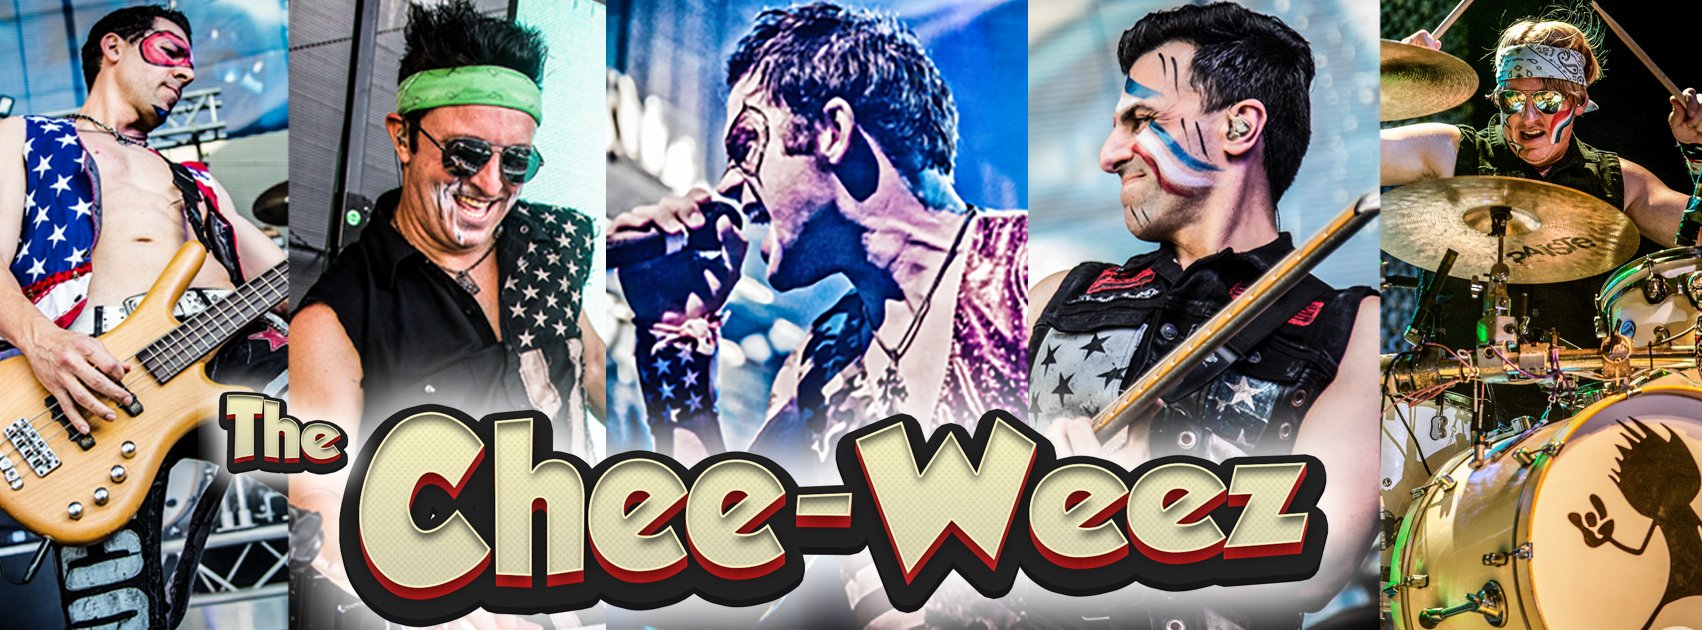 The Chee-Weez Members | ReverbNation